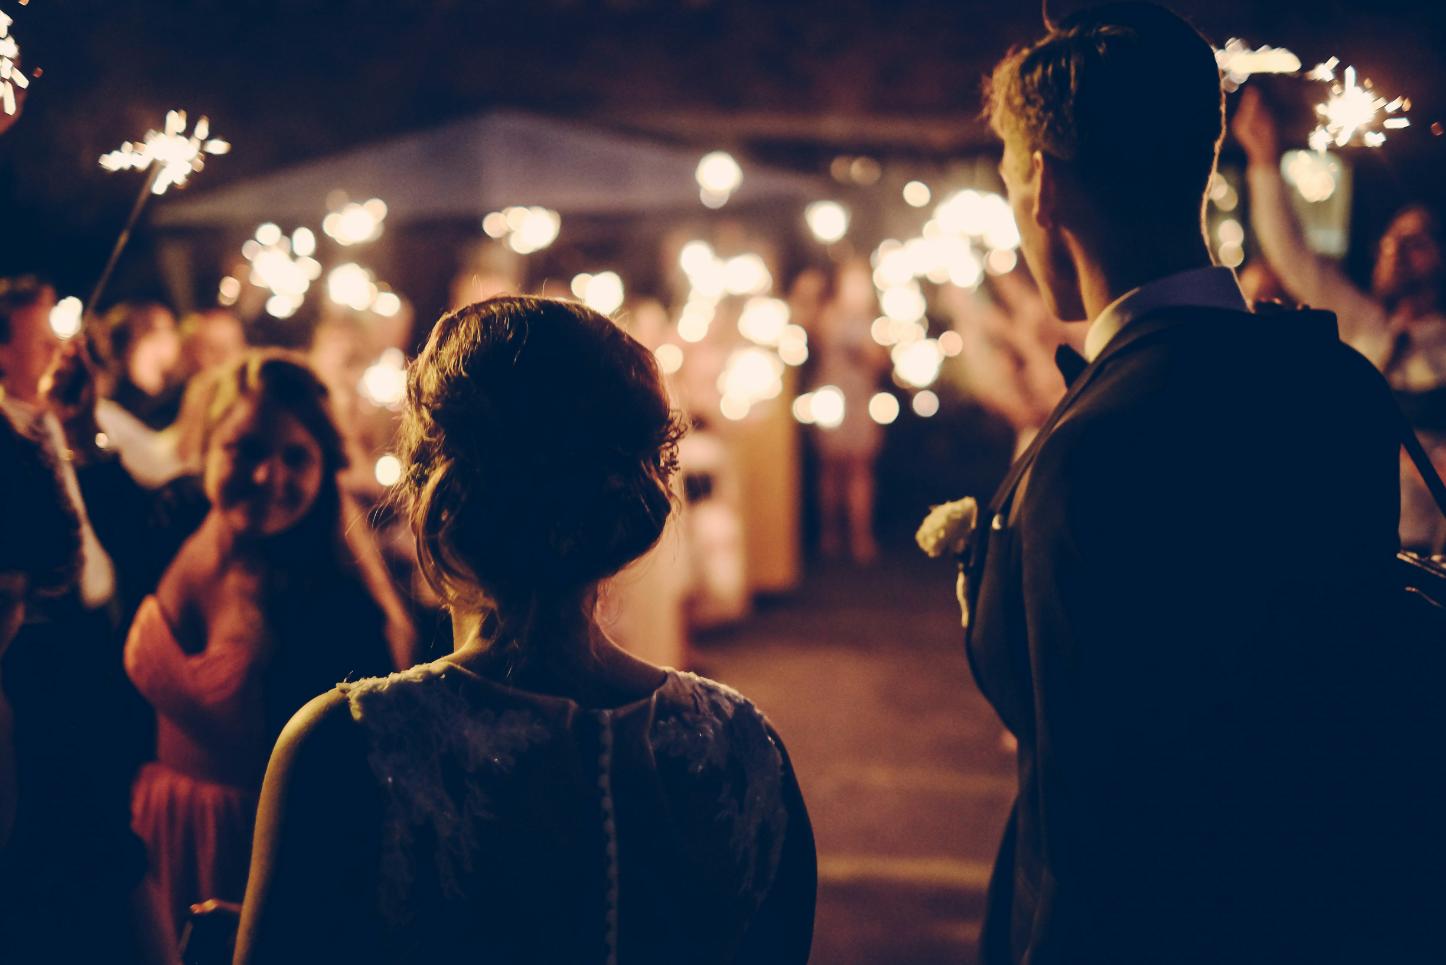 Harry Potter theme wedding - ideas, tips & tricks for a perfect magical night with all of your potterhead friends